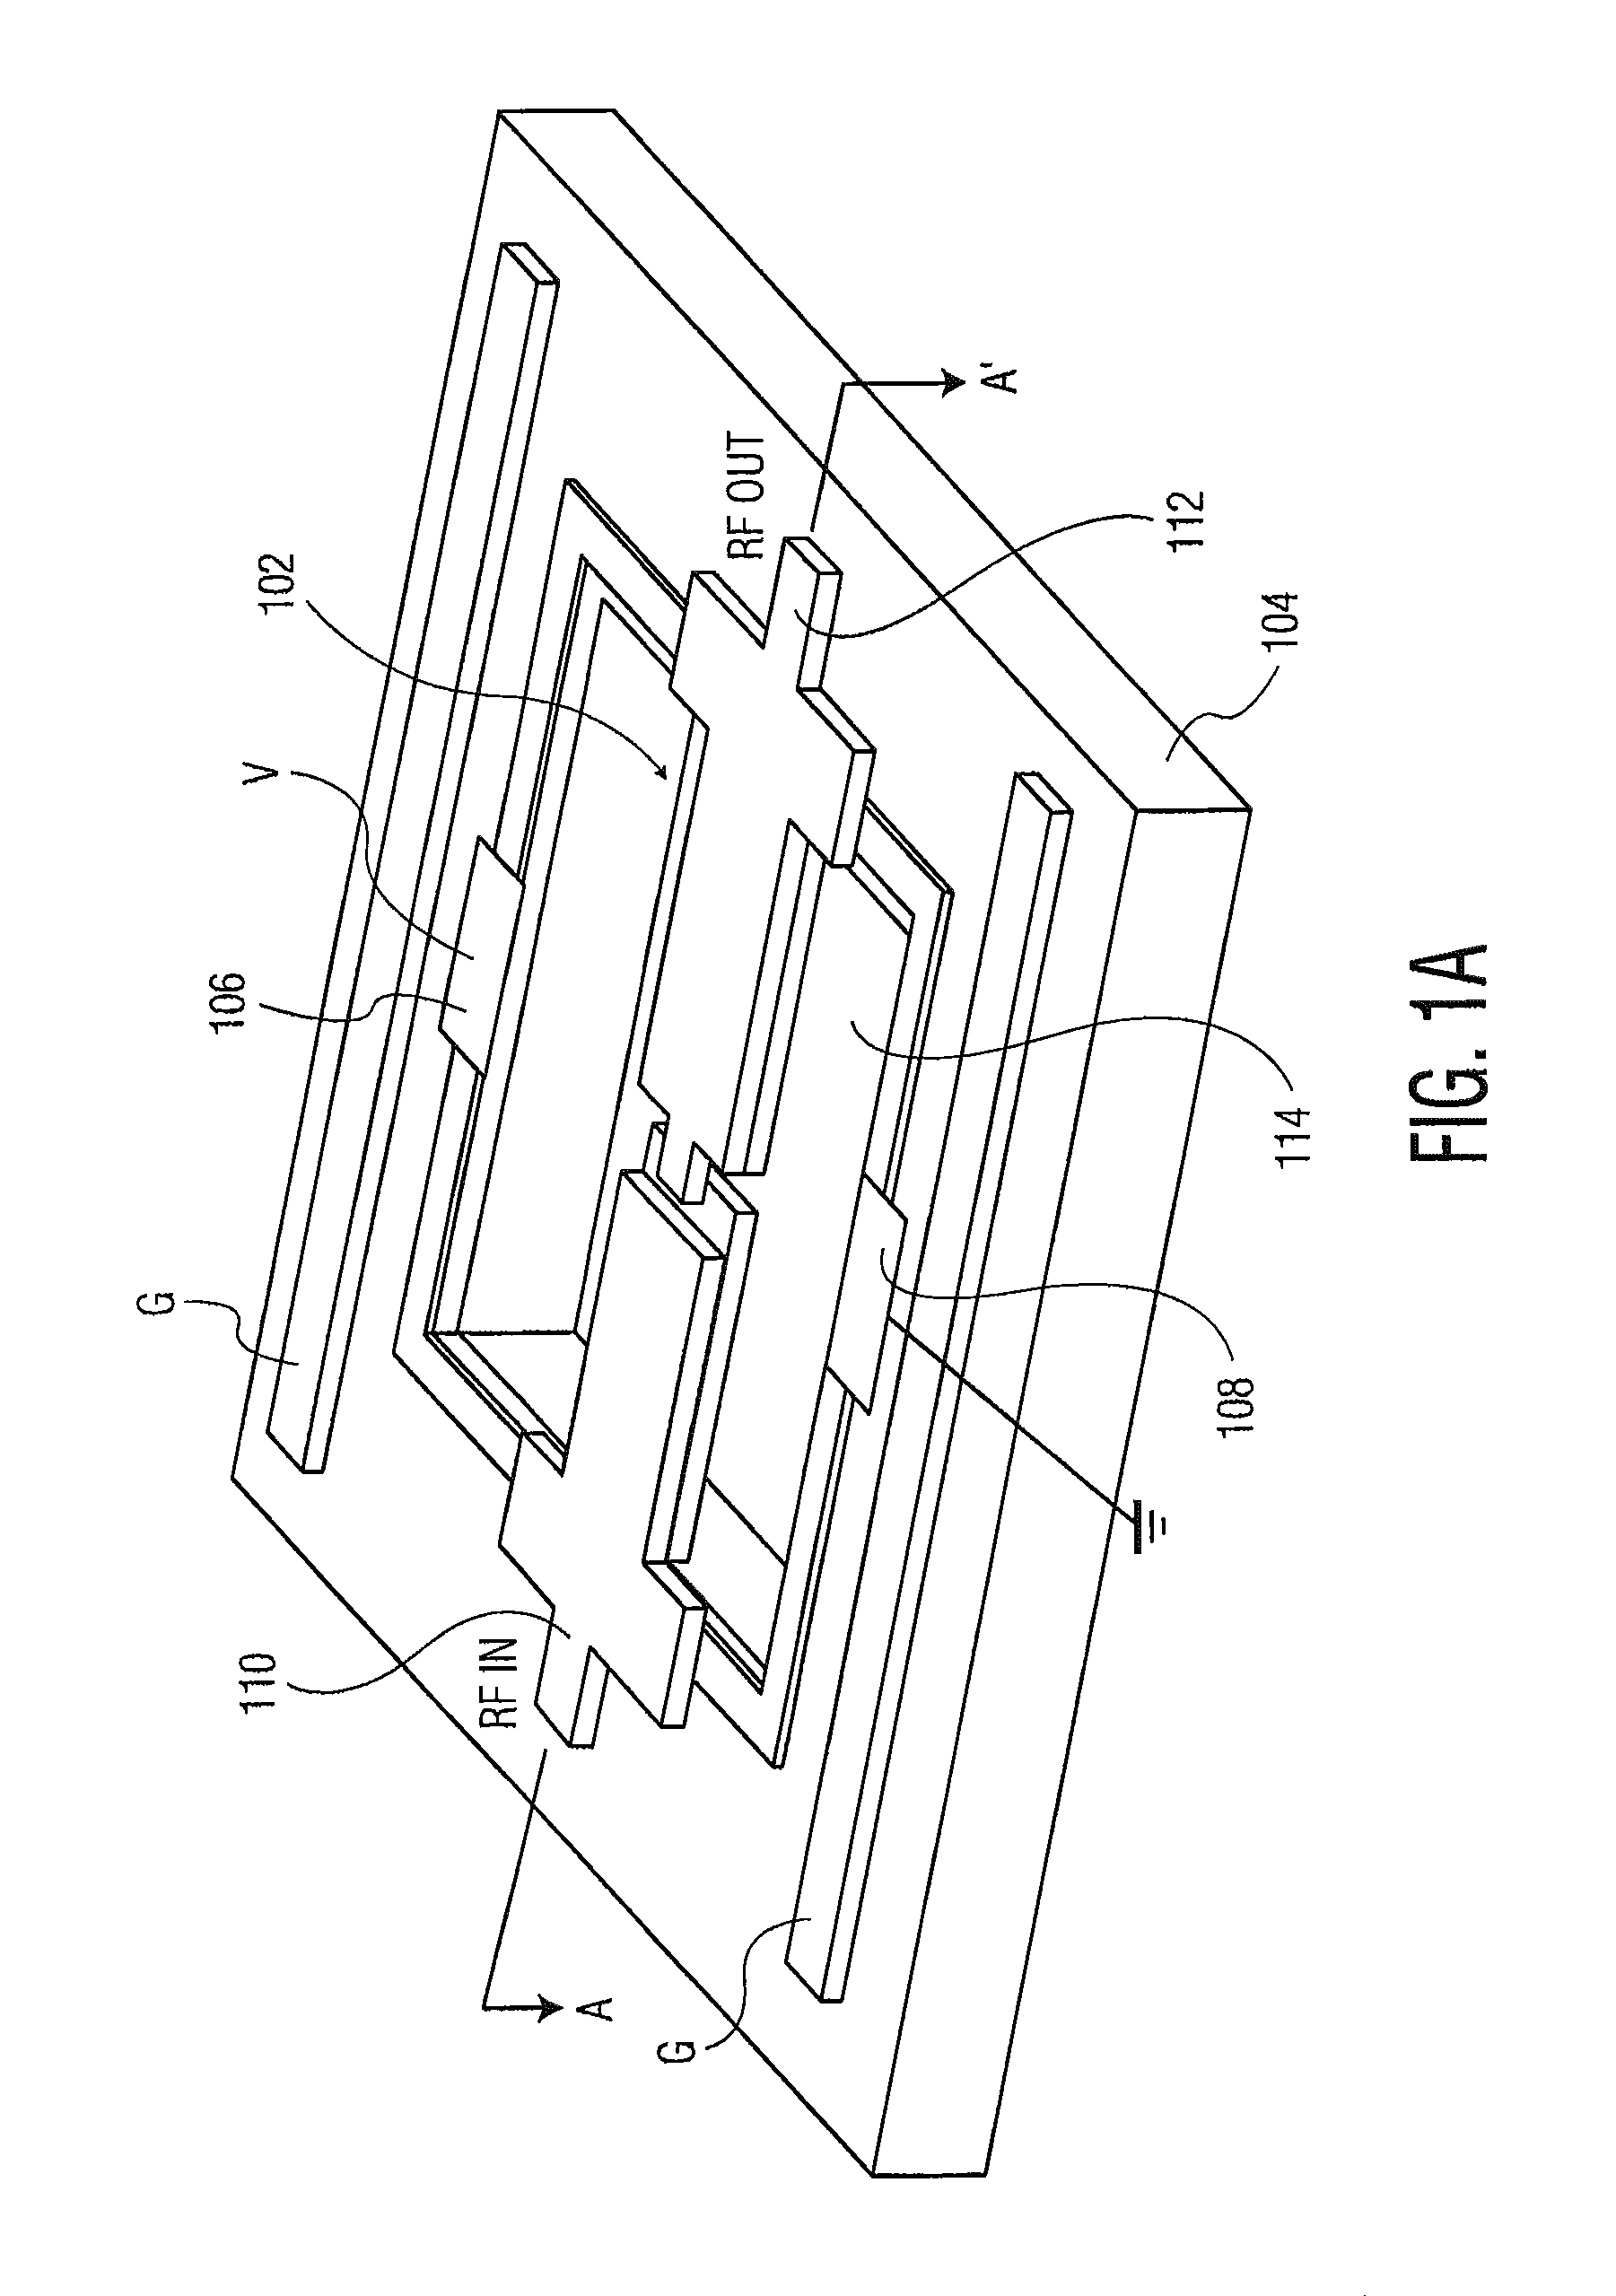 Systems and methods for operating piezoelectric switches